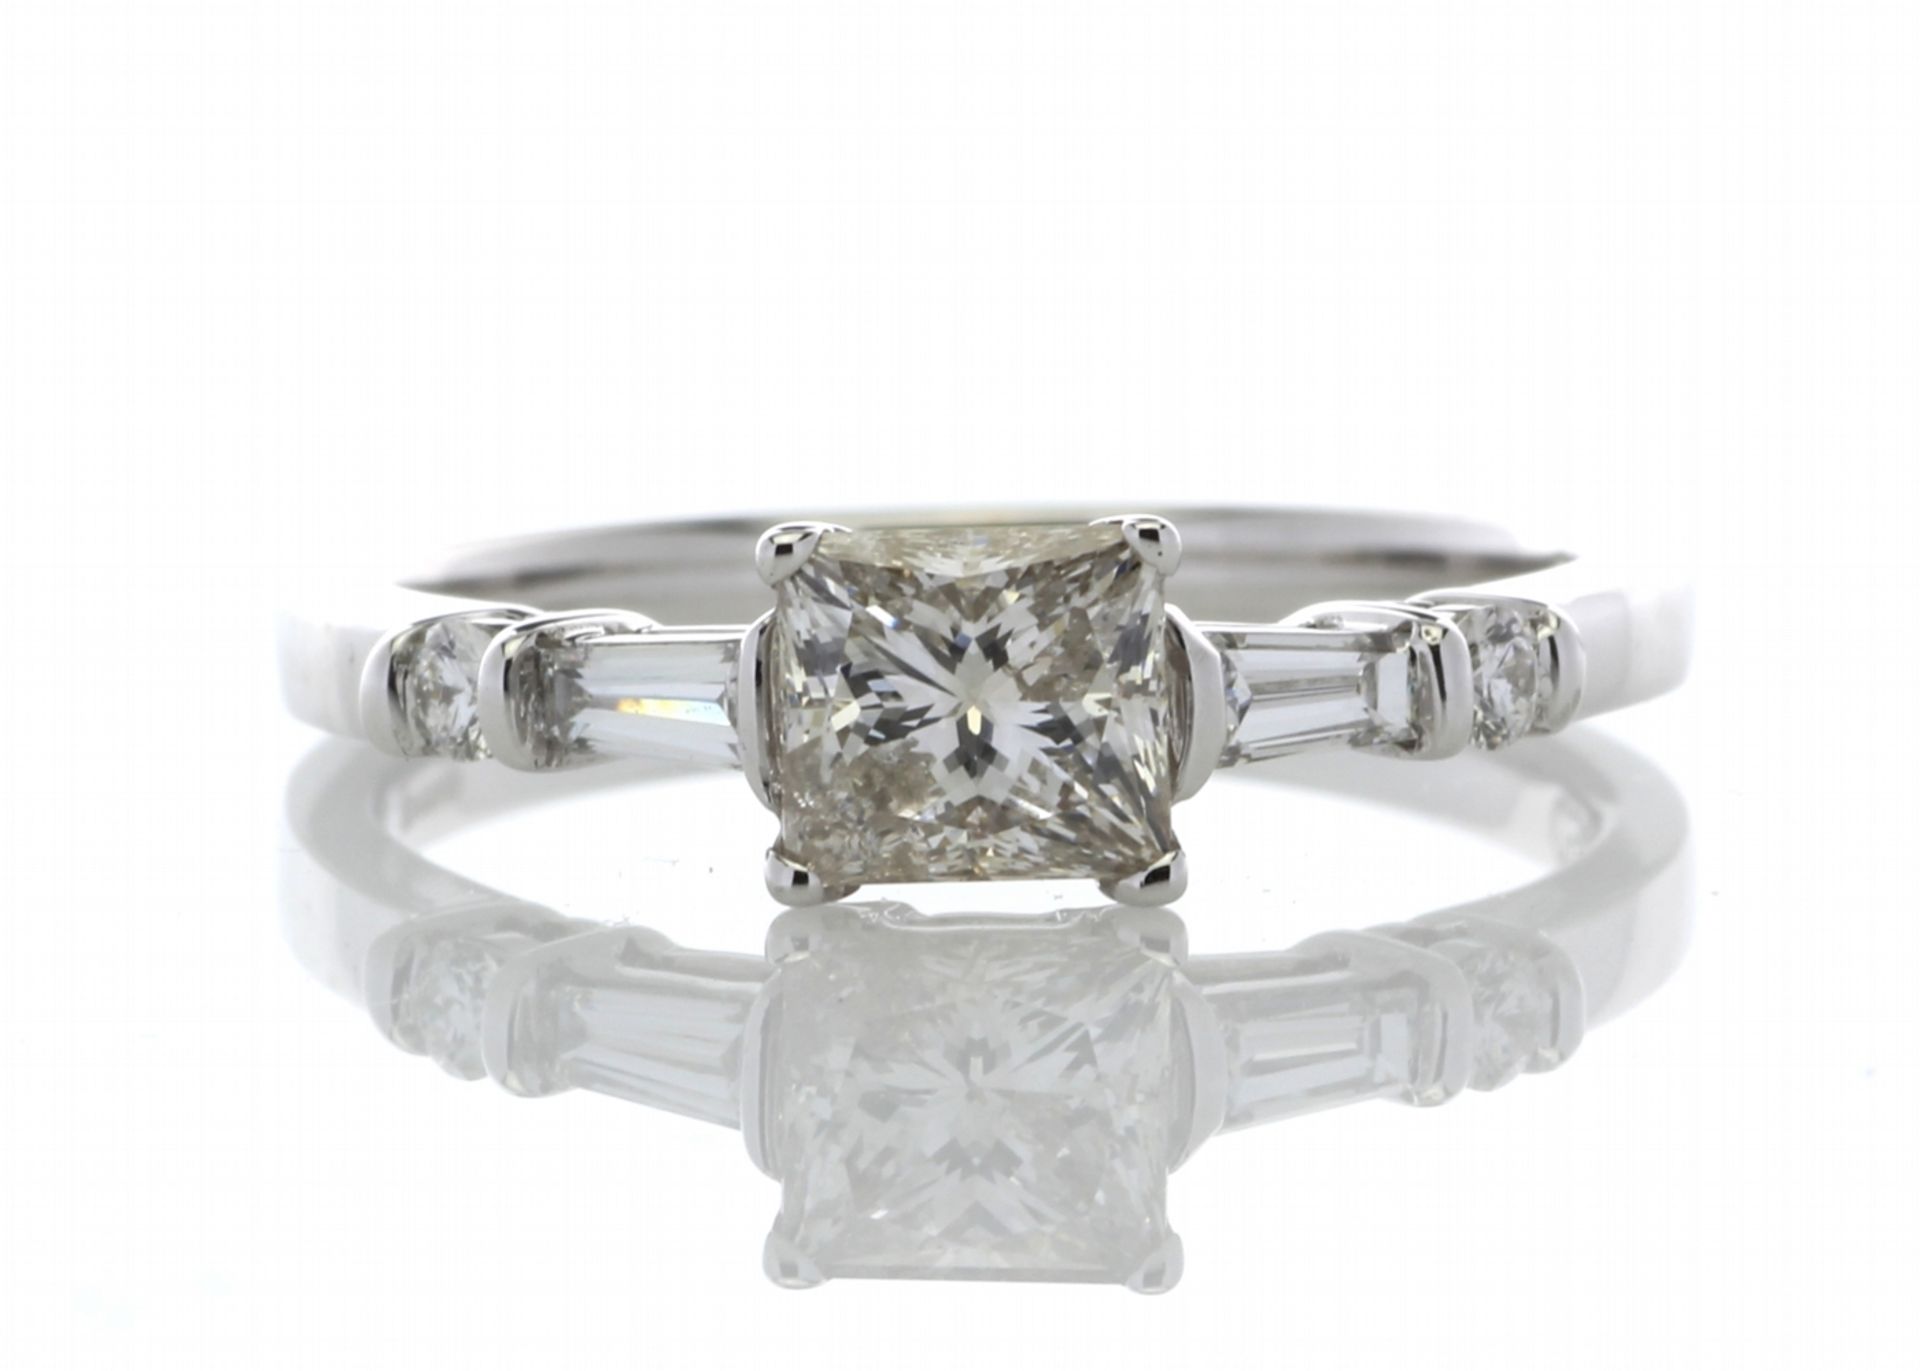 18ct White Gold Single Stone Princess Cut Diamond Ring With Set Shoulders (0.72) 0.96 - Image 4 of 4